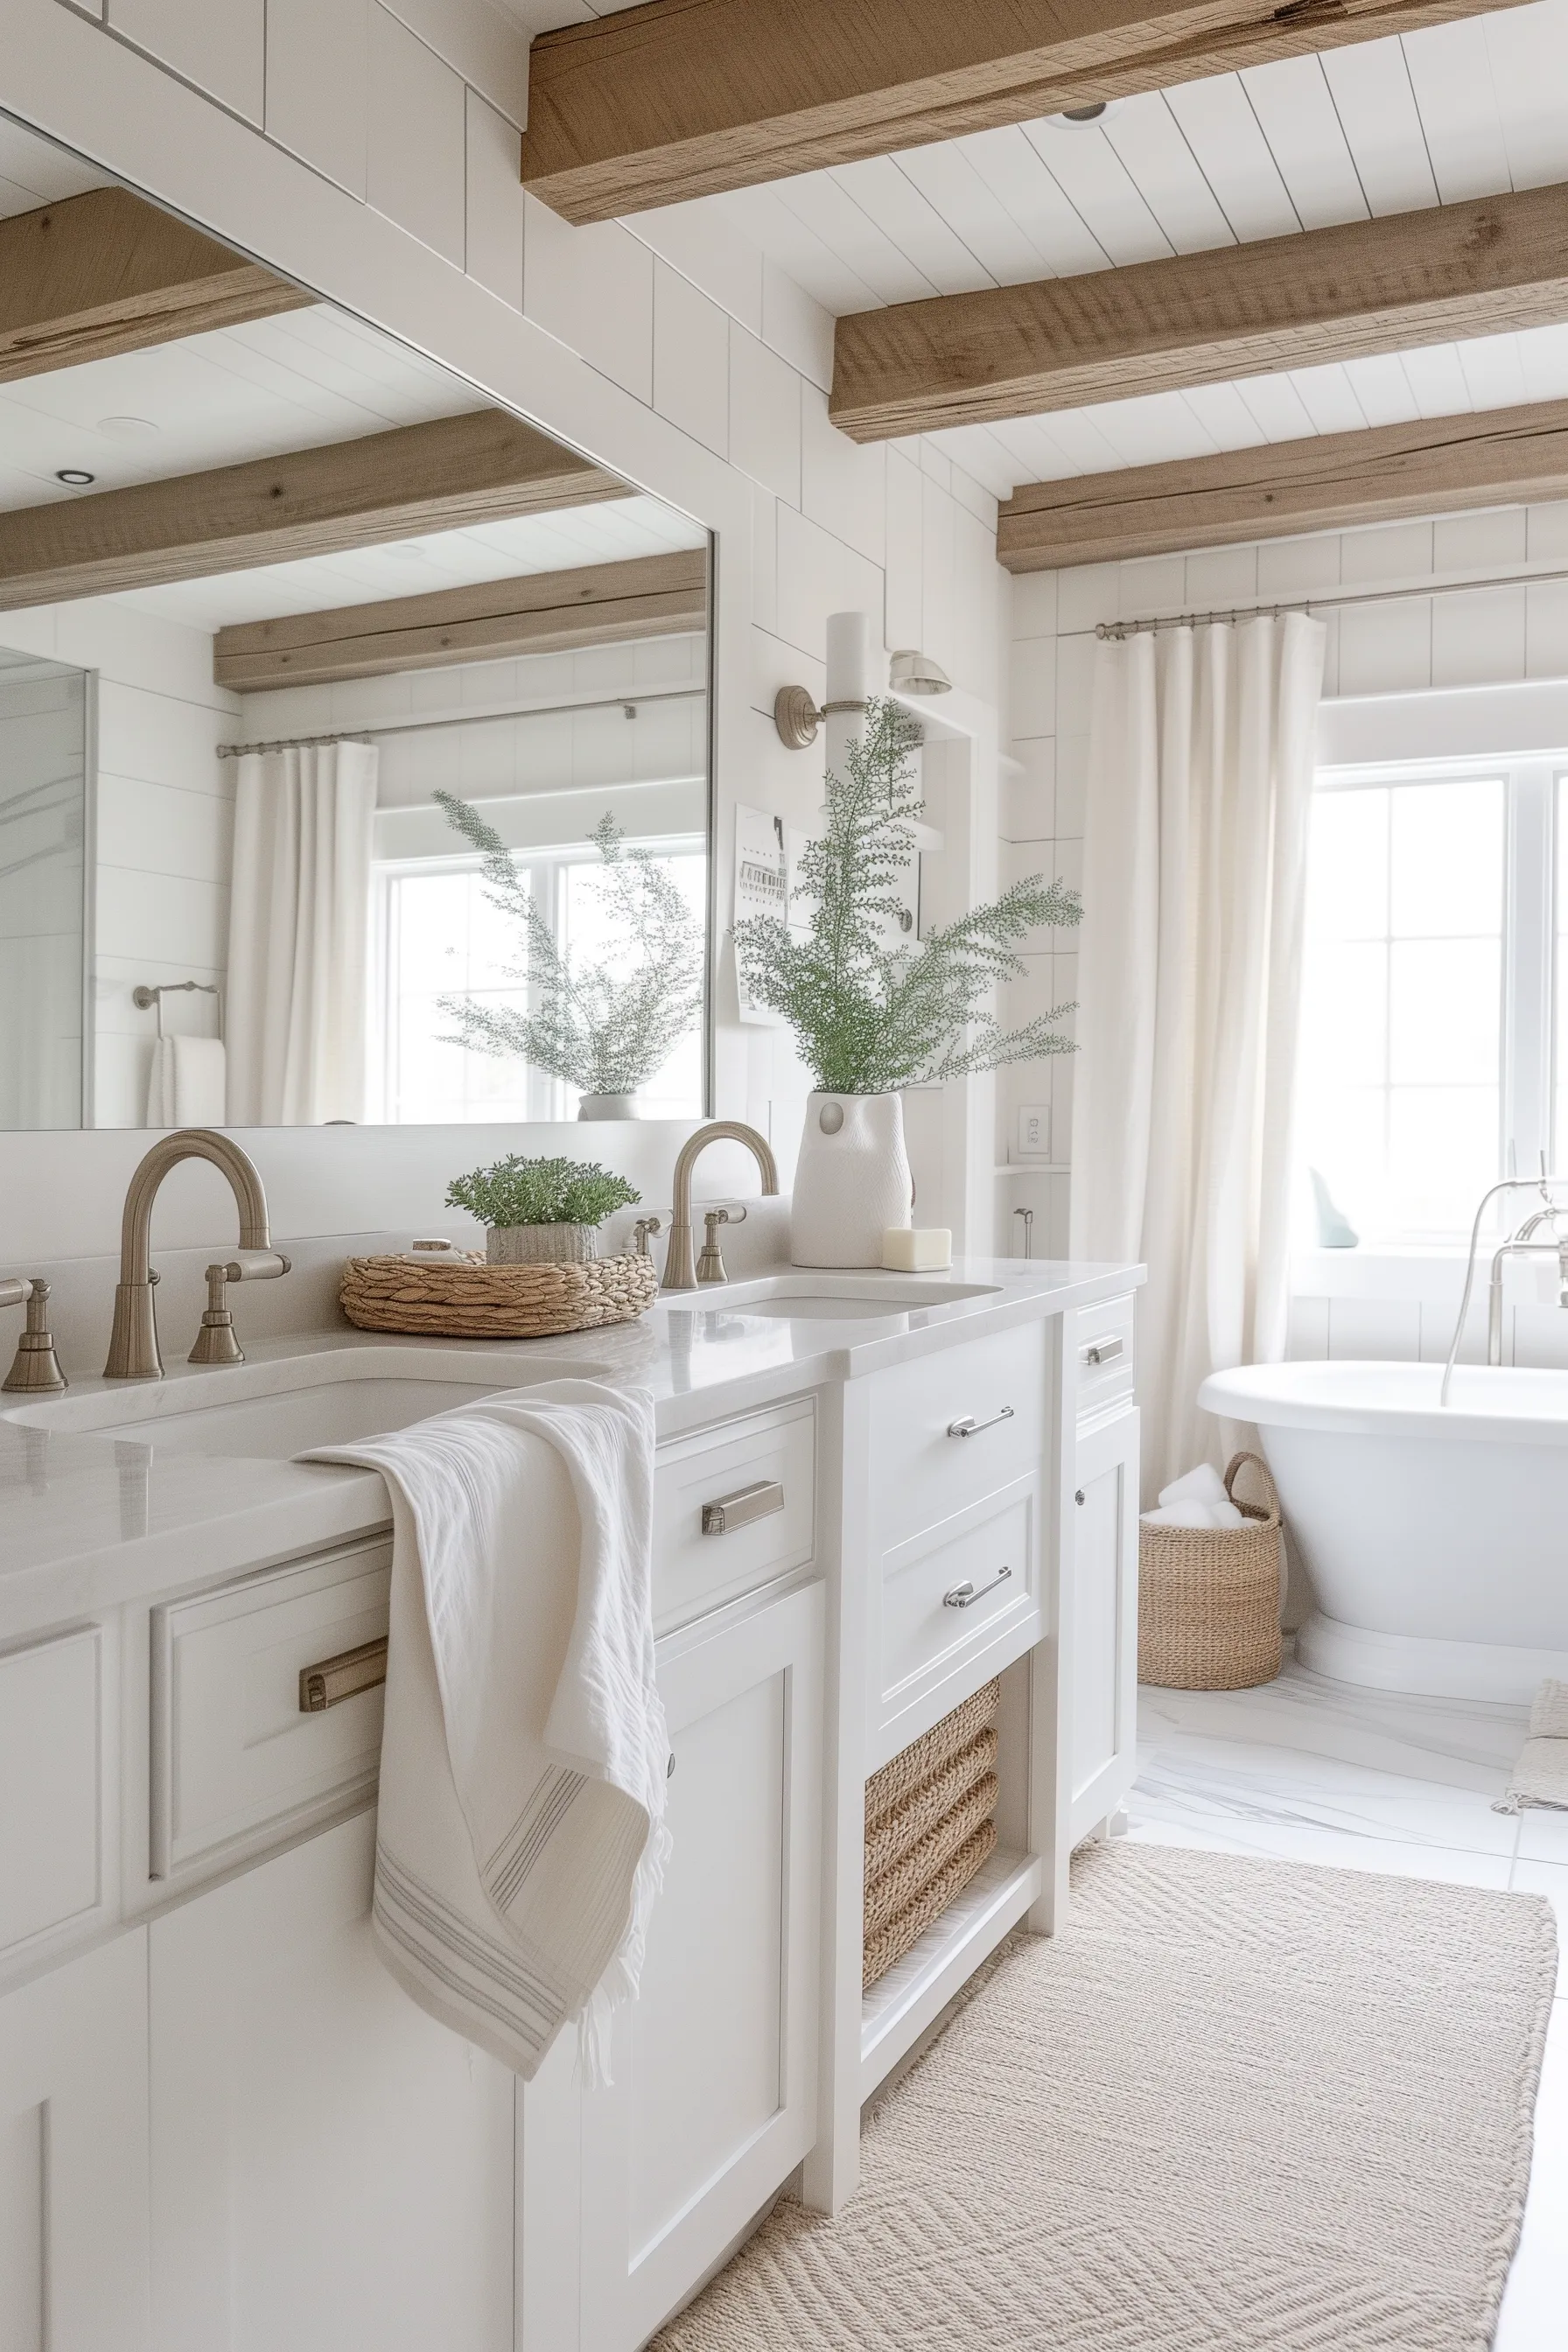 A white bathroom with plants, wooden beams and rattan furniture